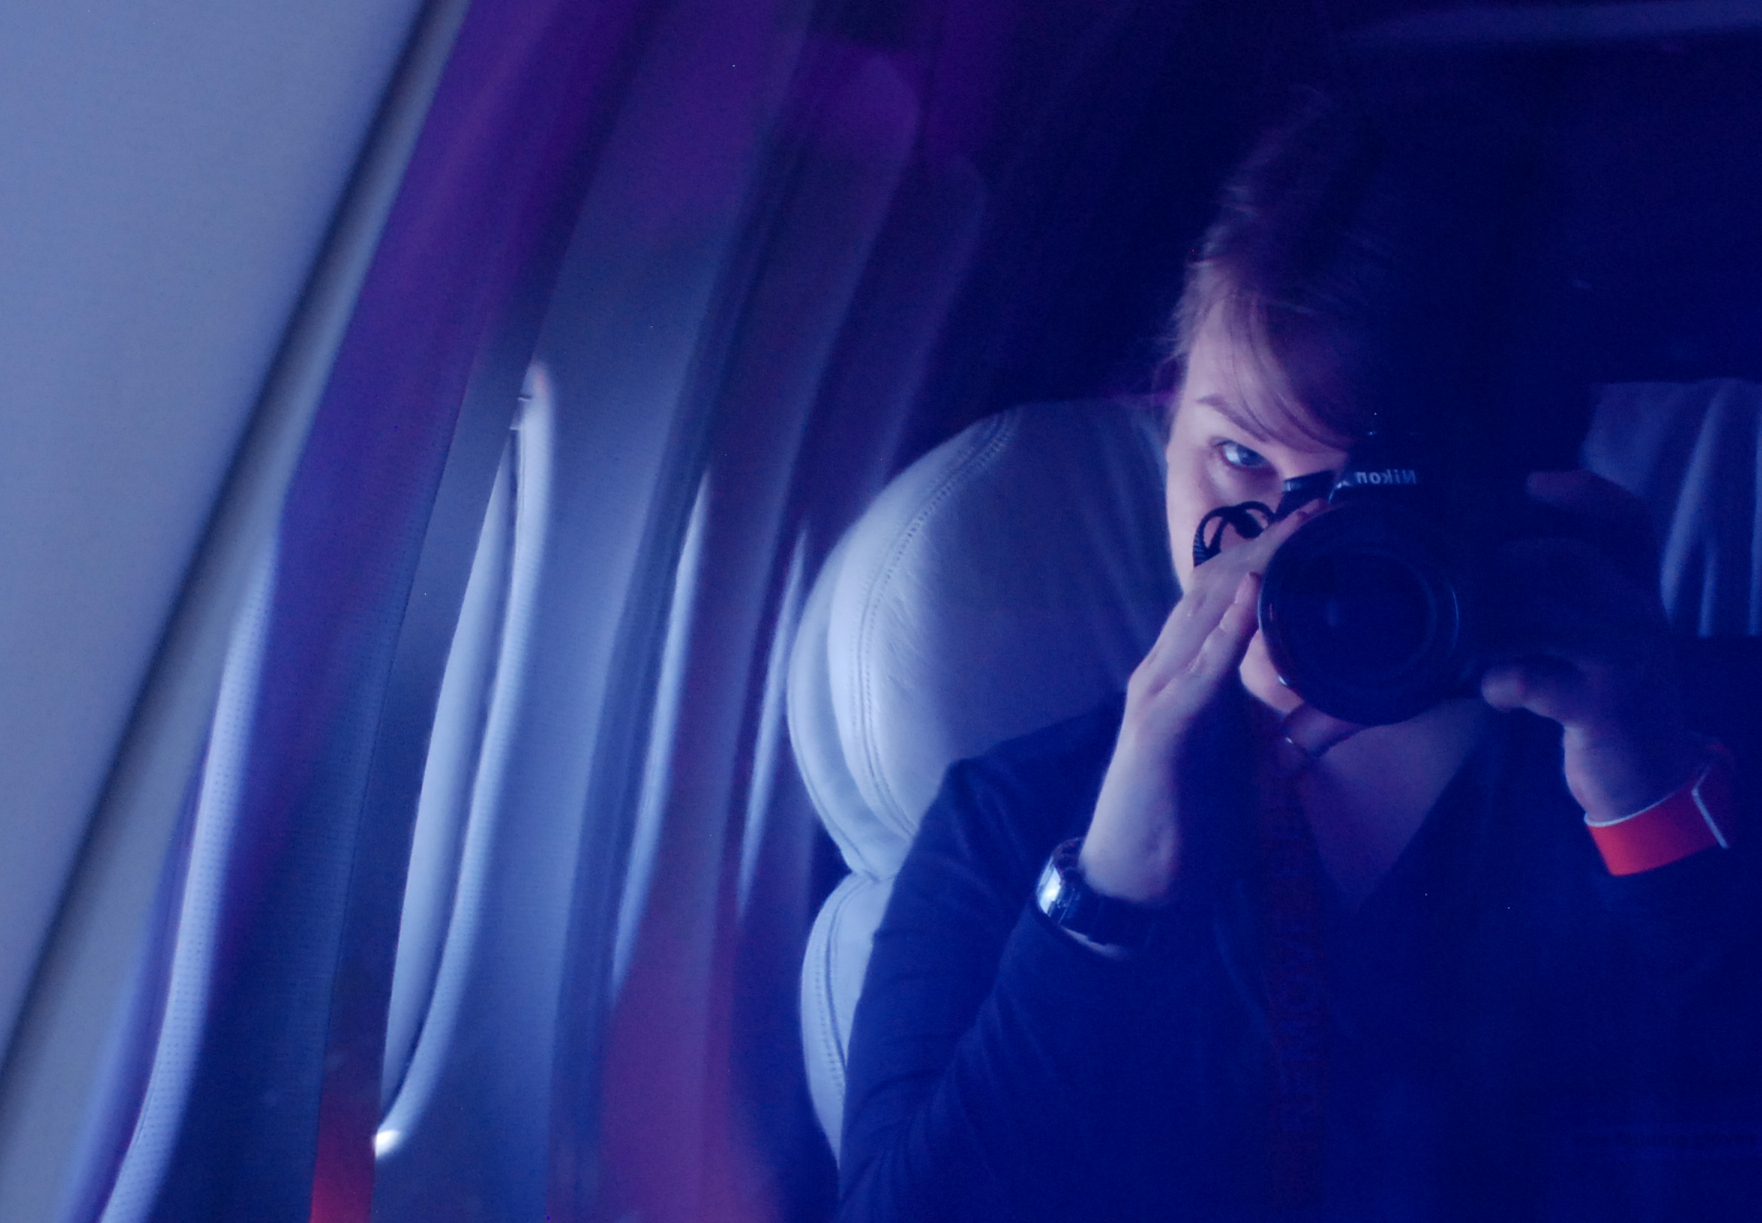 Travel writer Cynthia Drescher on a plane, holding a camera to her face